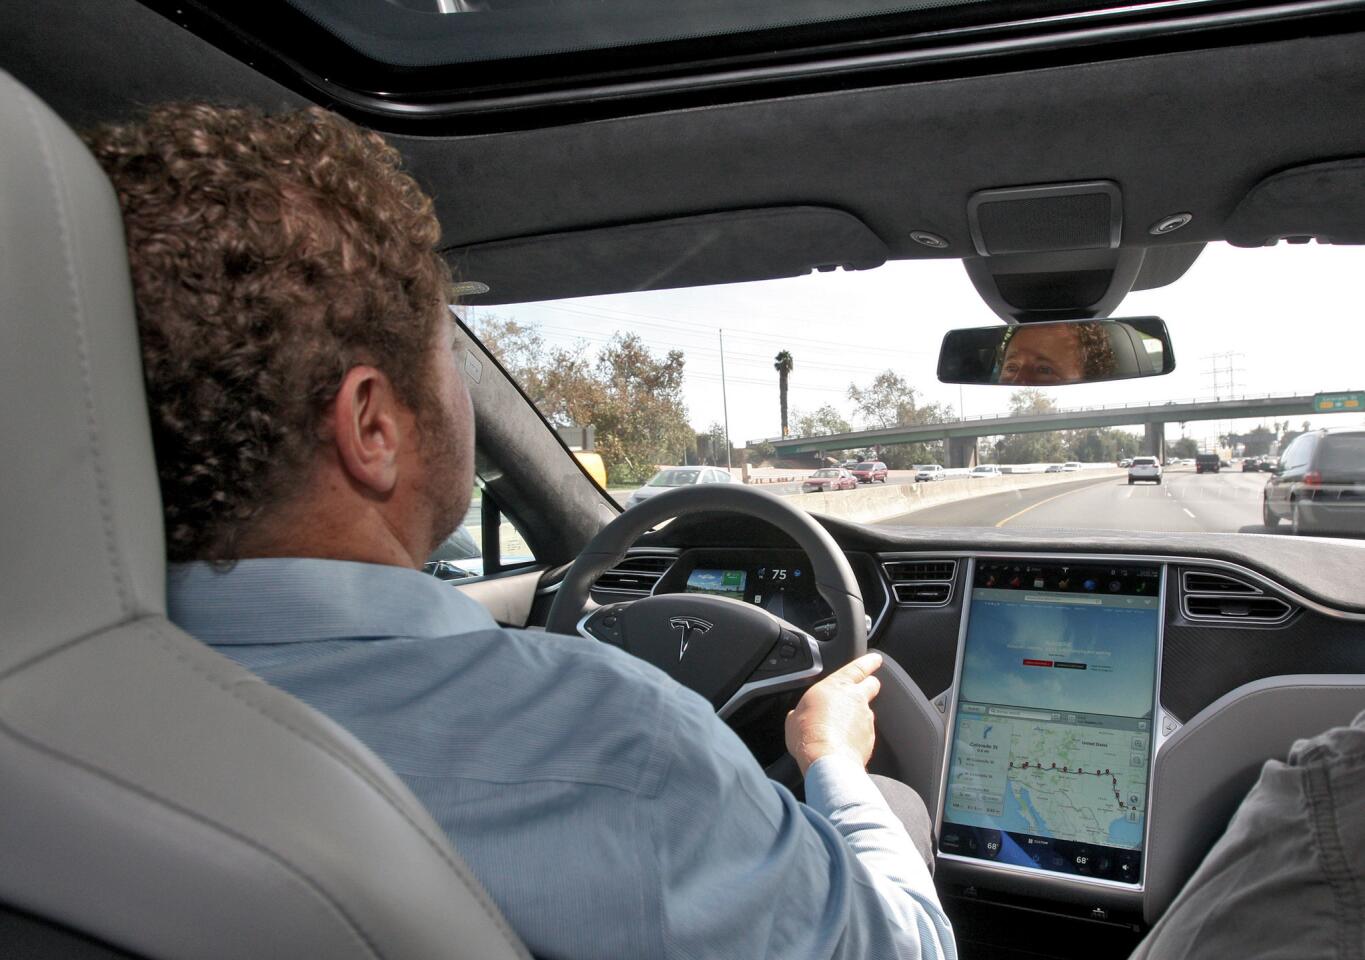 Tesla Motors S.W. Region General Manager Jeremy Snyder shows the electric car's Ludicrous speed setting, 0-60 in 2.8 seconds and the auto pilot feature, in Burbank on Friday, October 23, 2015. Ludicrous speed setting can create a force of 1 gravity on the vehicle's occupant and the auto pilot feature can apply the brakes or change lanes without the driver's help. The showroom, where a customer can order their own personalized Tesla electric vehicle, will soon have a customer lounge and charging stations.